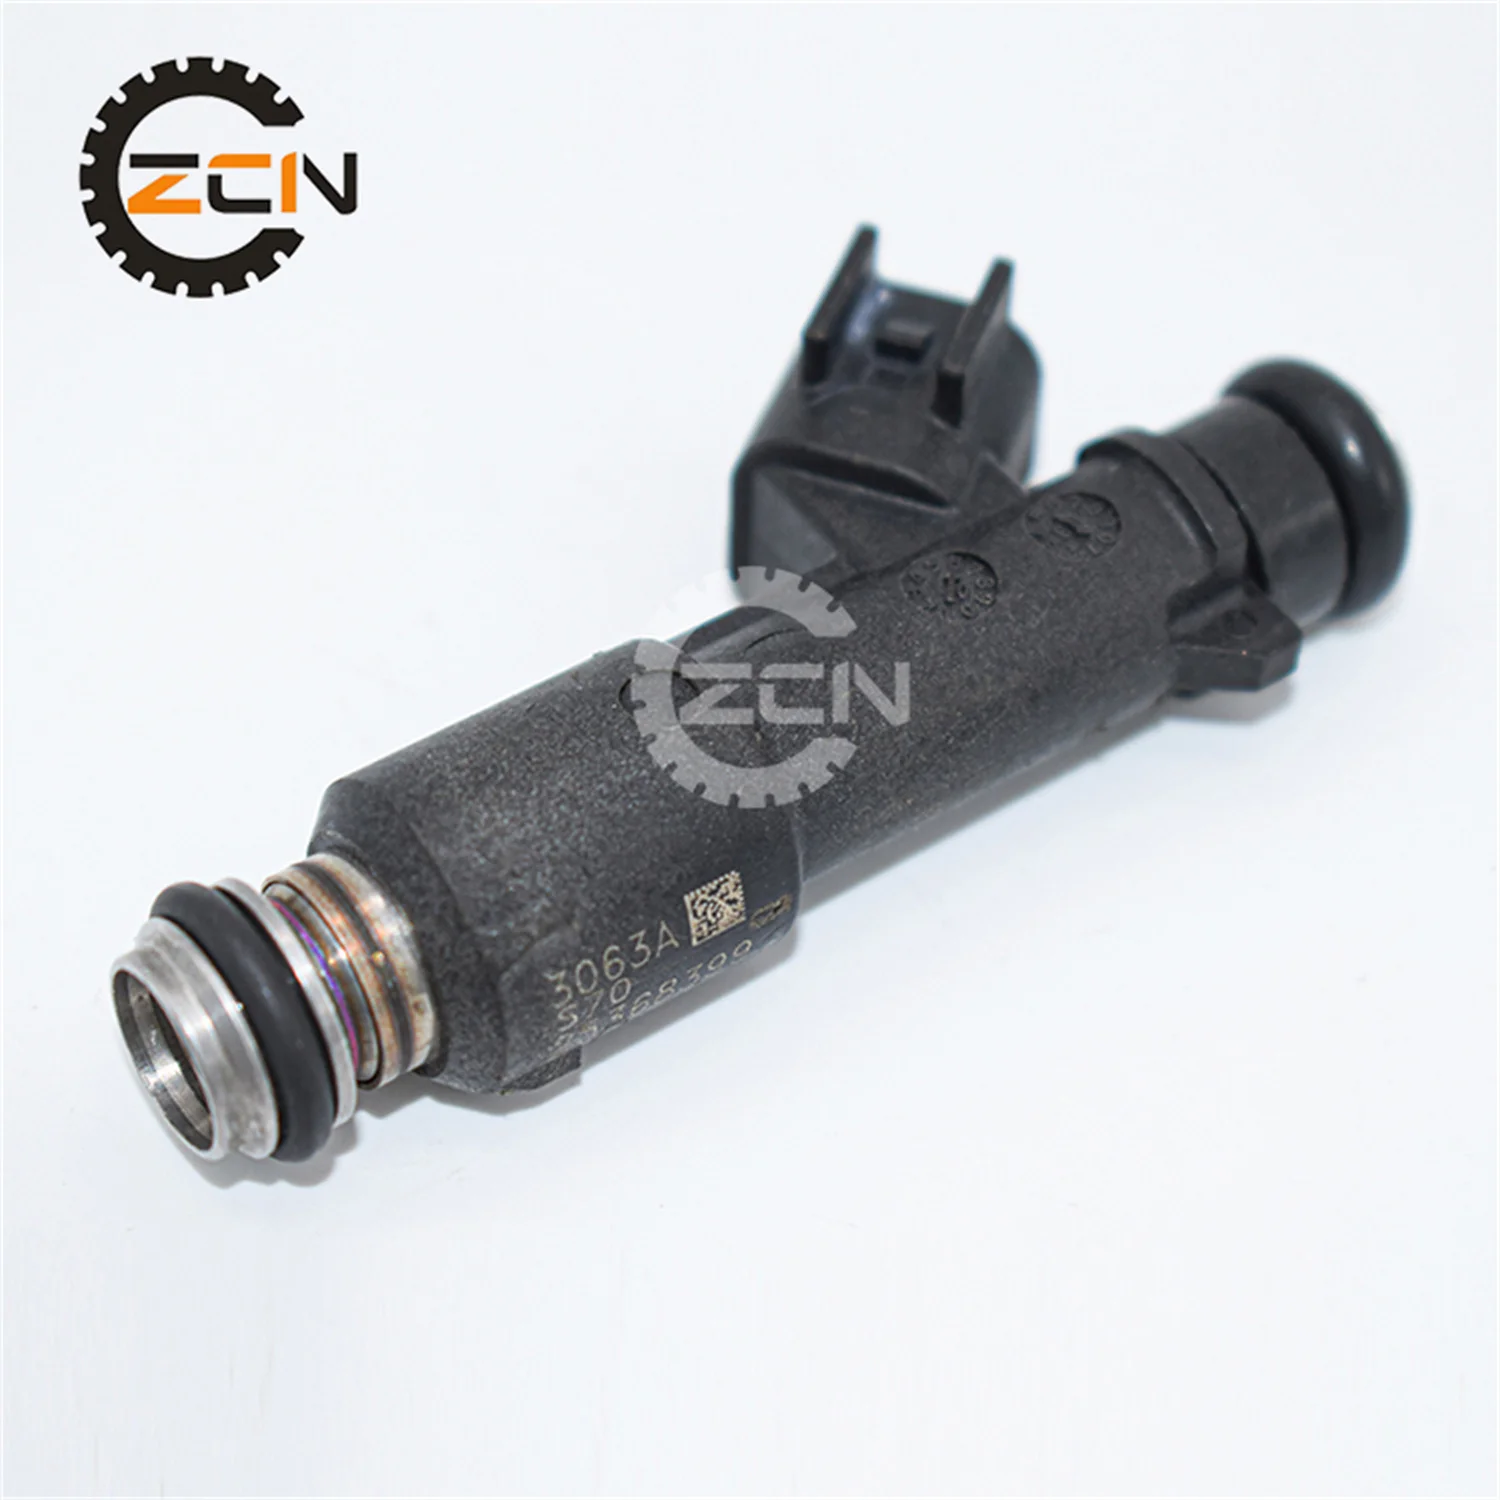 

25368399 Fuel Injector Nozzle For DFM DFSK Glory 330 V27 C37